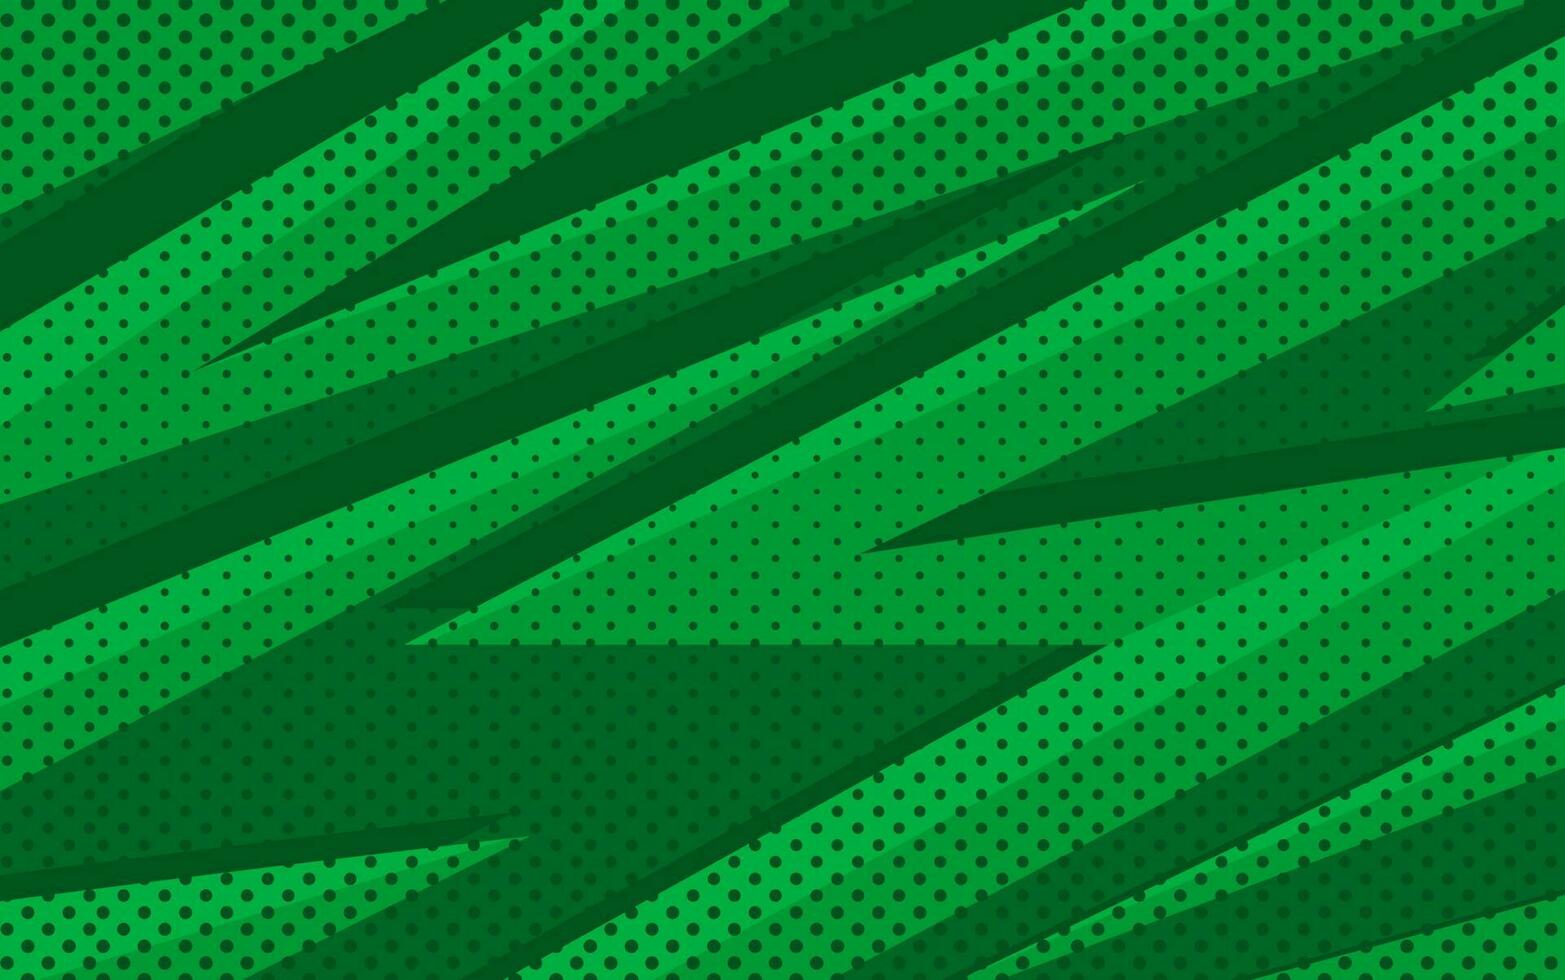 https://static.vecteezy.com/system/resources/previews/024/380/345/non_2x/green-abstract-background-with-dot-pattern-for-sports-gaming-themed-design-free-vector.jpg